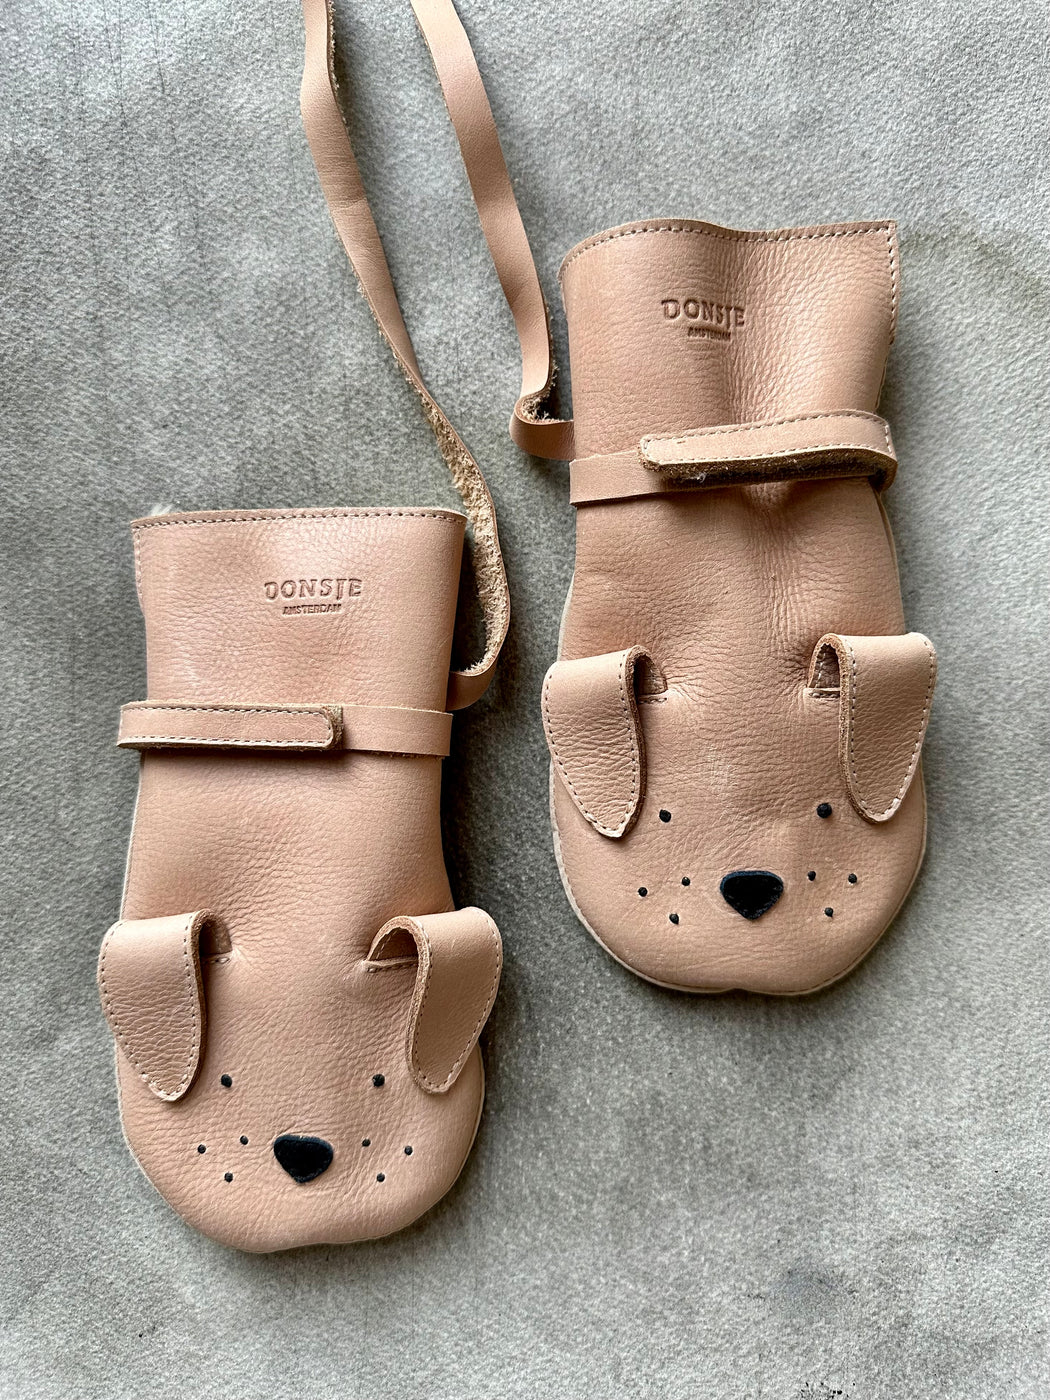 Donsje Leather "Doggy" Mittens:  5 - 6 years